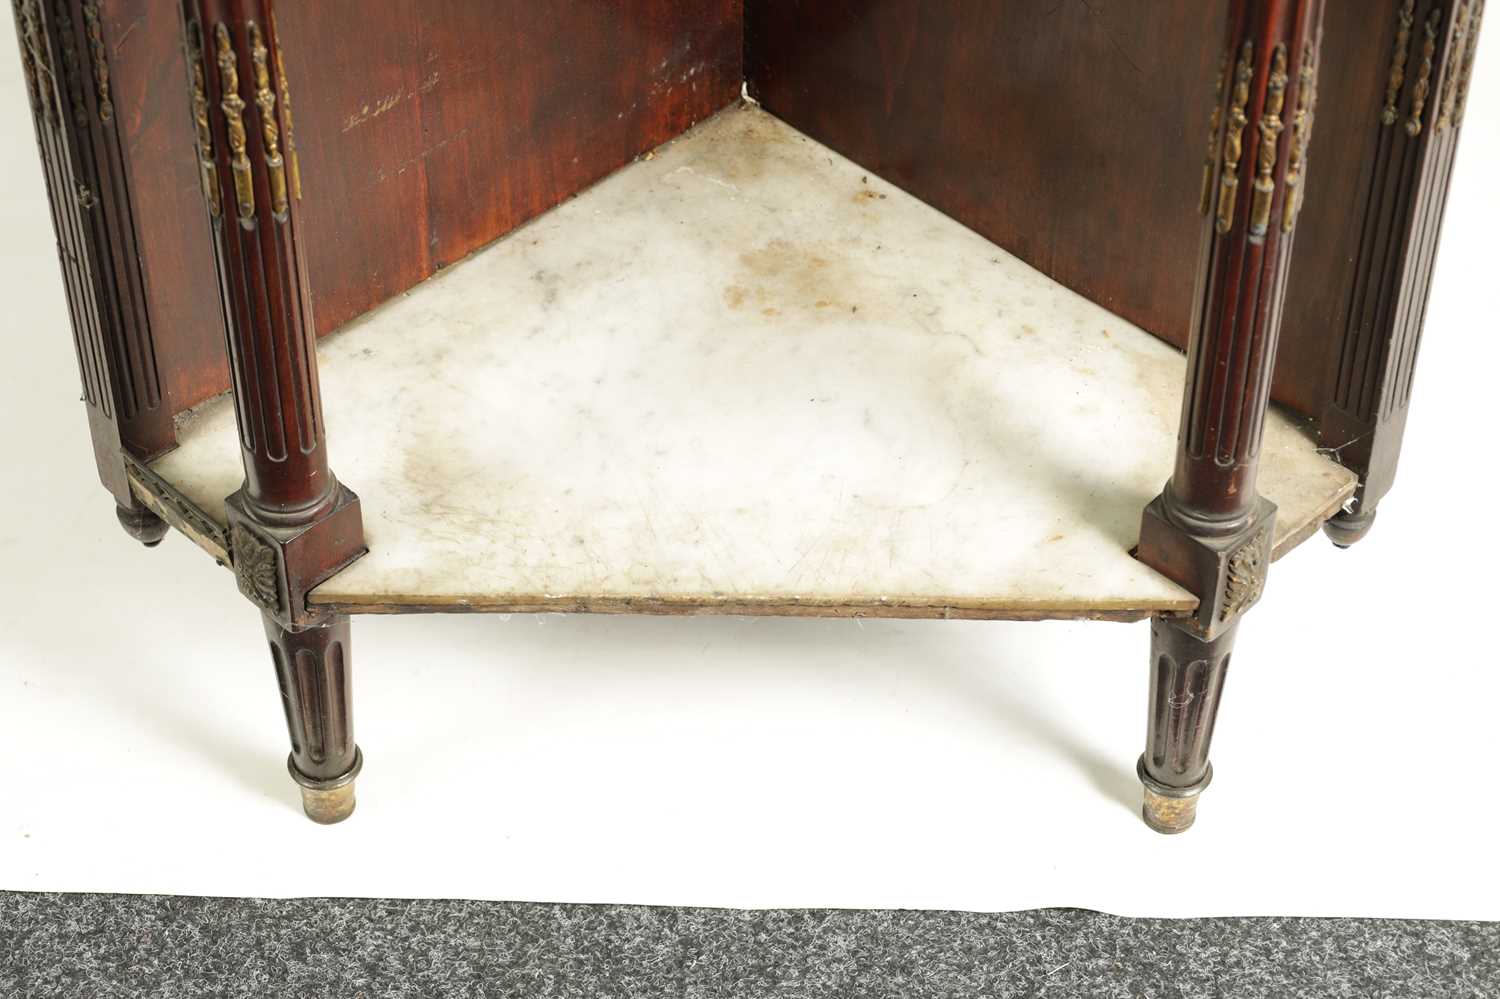 AN EARLY 19TH CENTURY FRENCH MAHOGANY AND WHITE MARBLE ORMOLU MOUNTED CORNER TABLE - Image 5 of 8